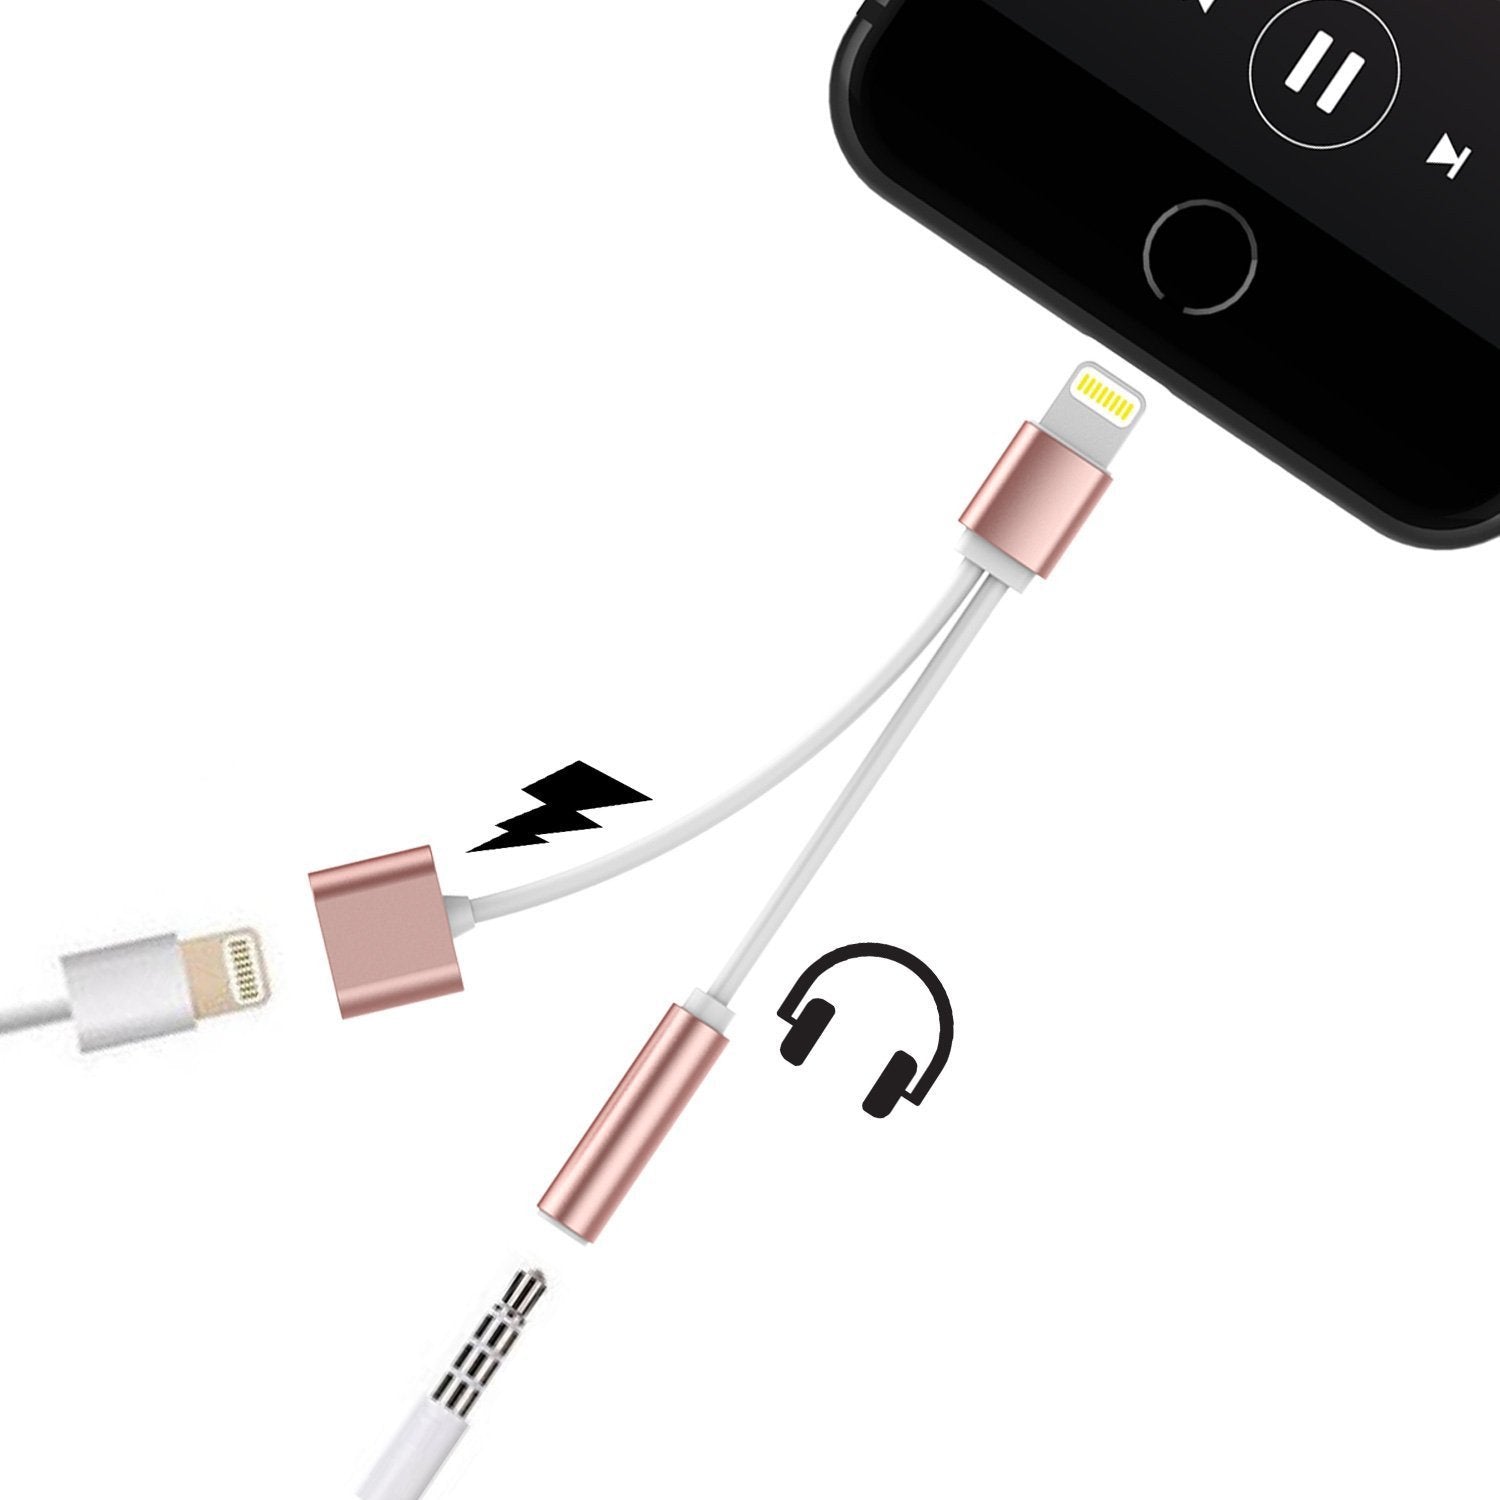 PUNKZAP Lightning Adapter Cable 2 in 1 Splitter Charger with 3.5mm Earphone AUX Jack|Charge & Listen to your Apple iPhone [ROSE] - PunkCase NZ